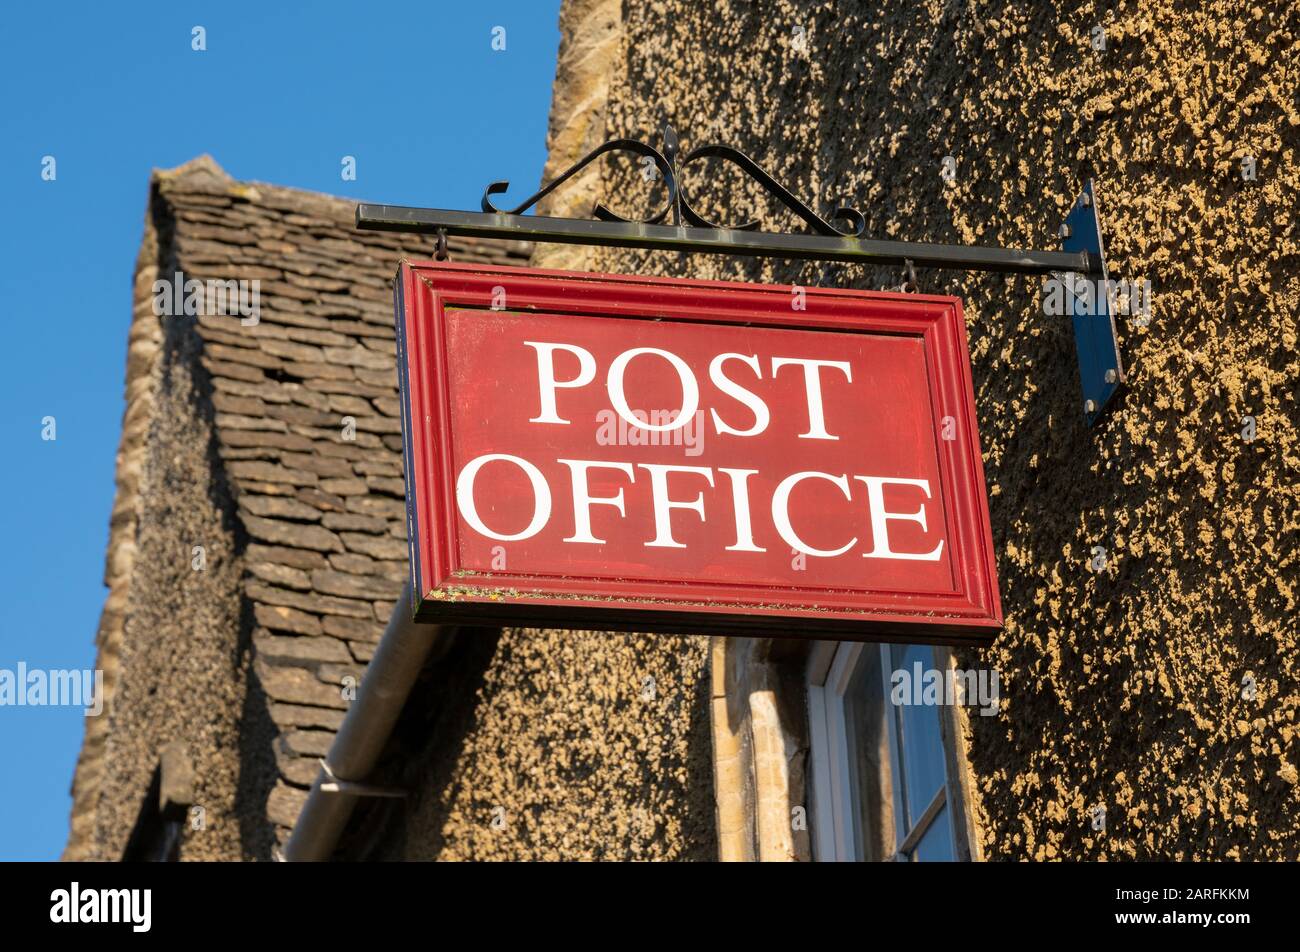 Post Office sign in rural location, England, United kingdom Stock Photo